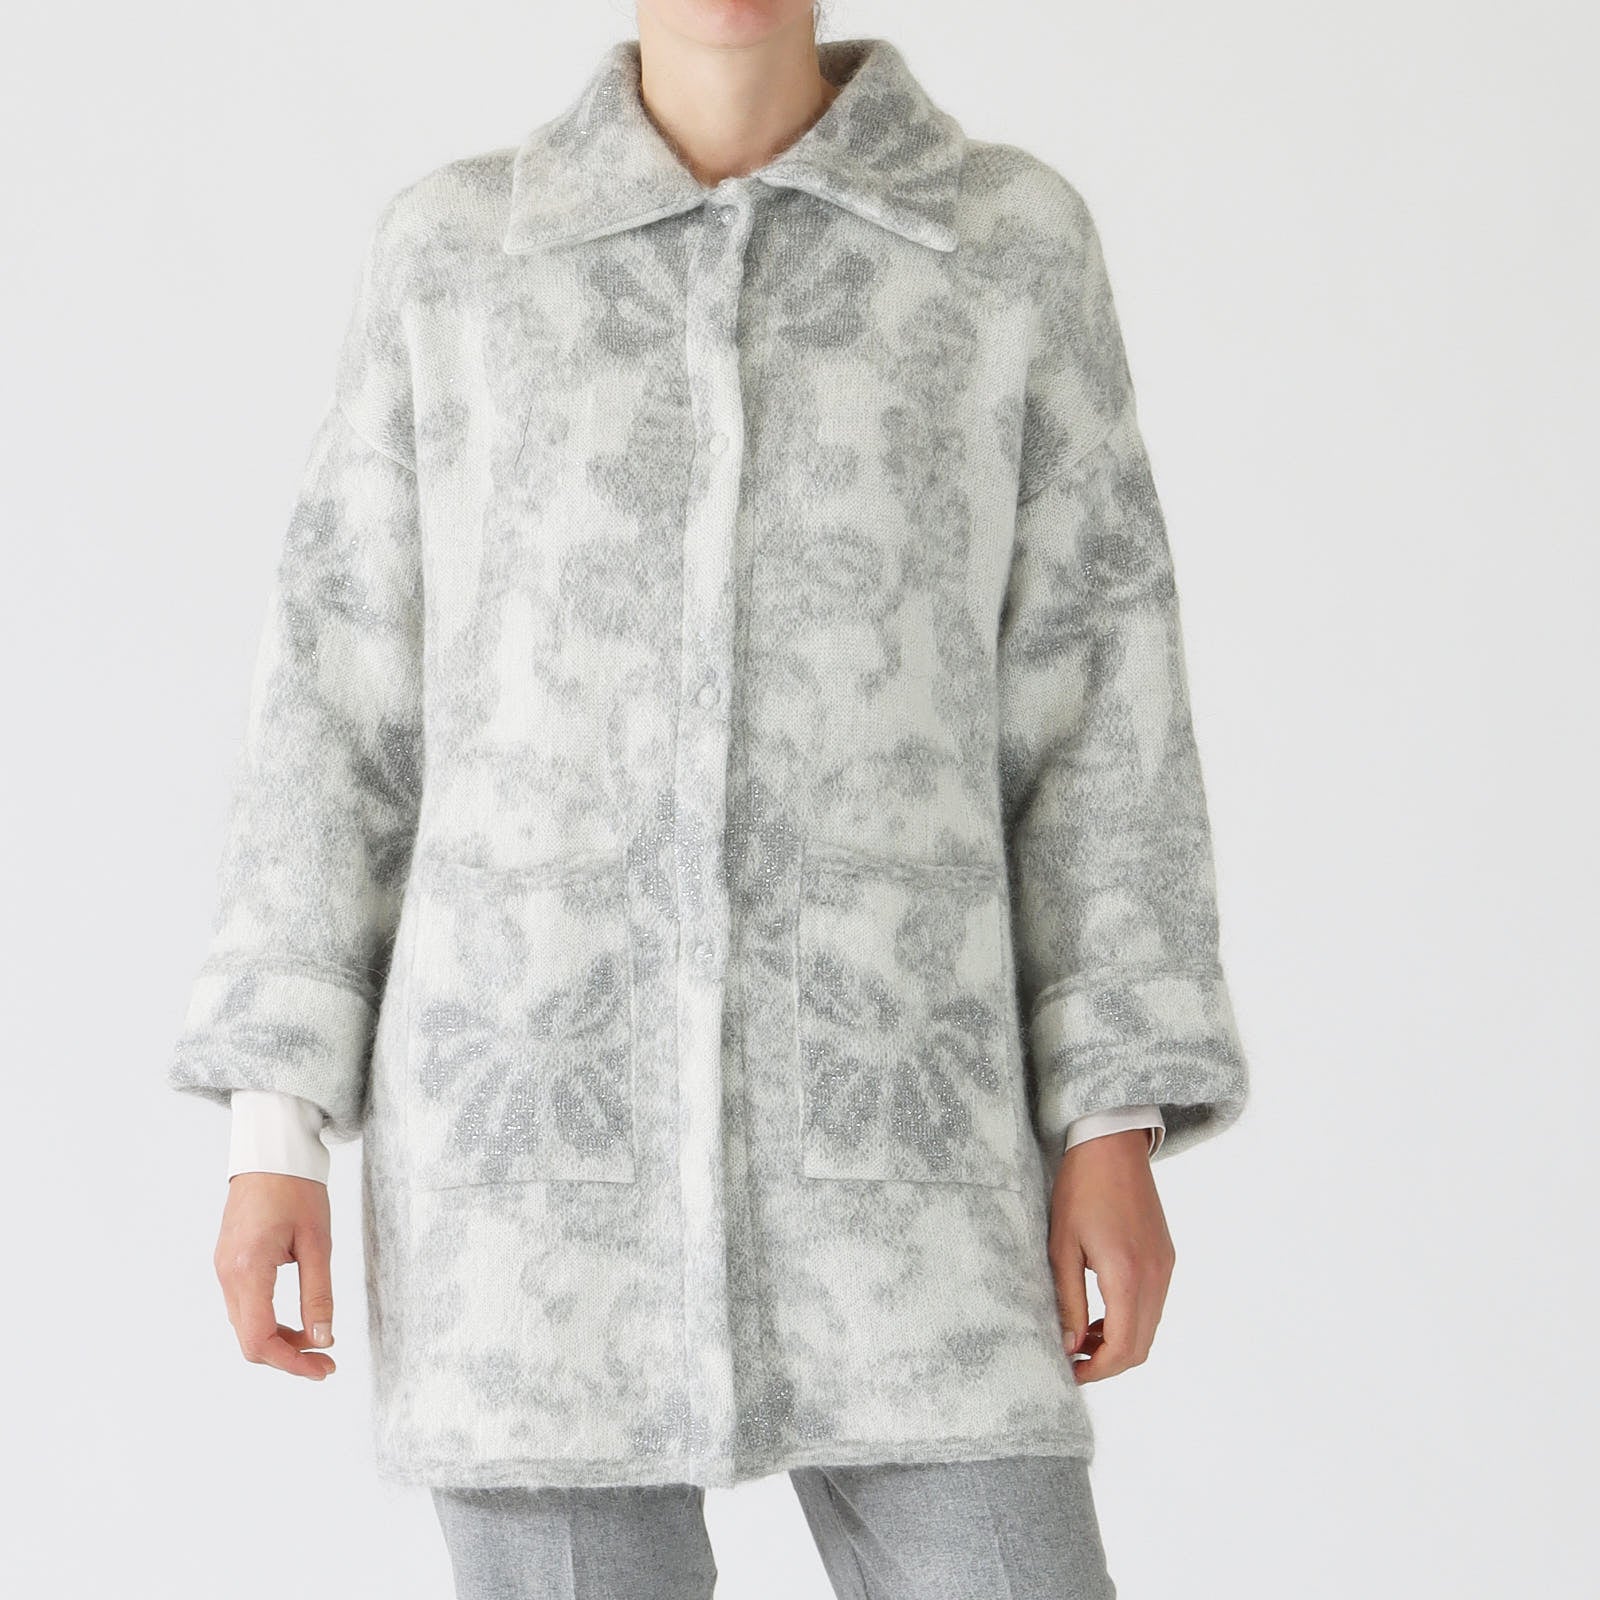 Granito Soft Patterned Knit Coat